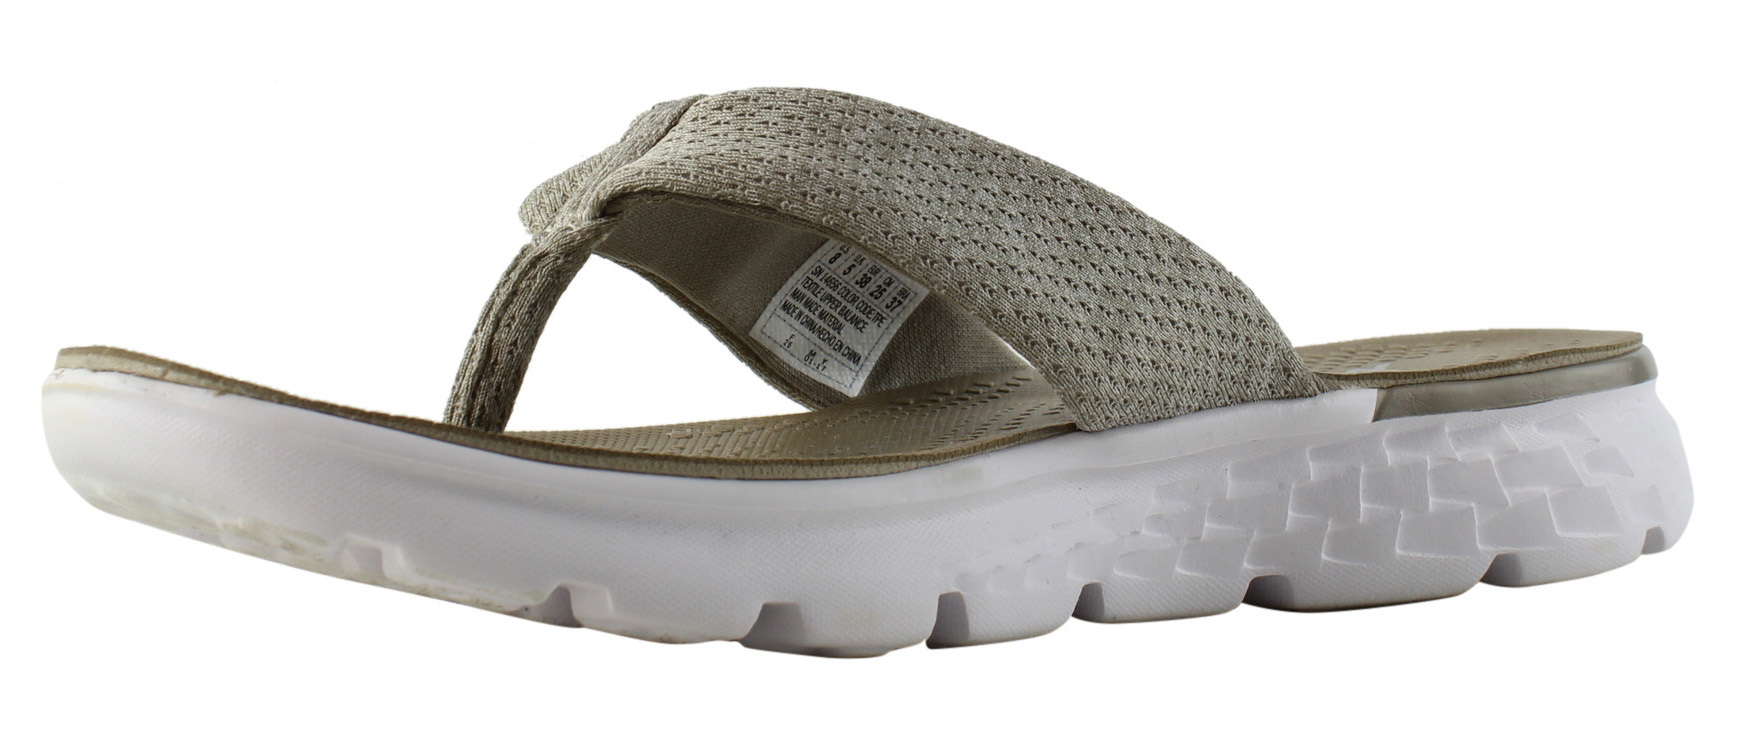 Skechers Womens 14656 Taupe/White Flip Flops Size 8 (303275 ...